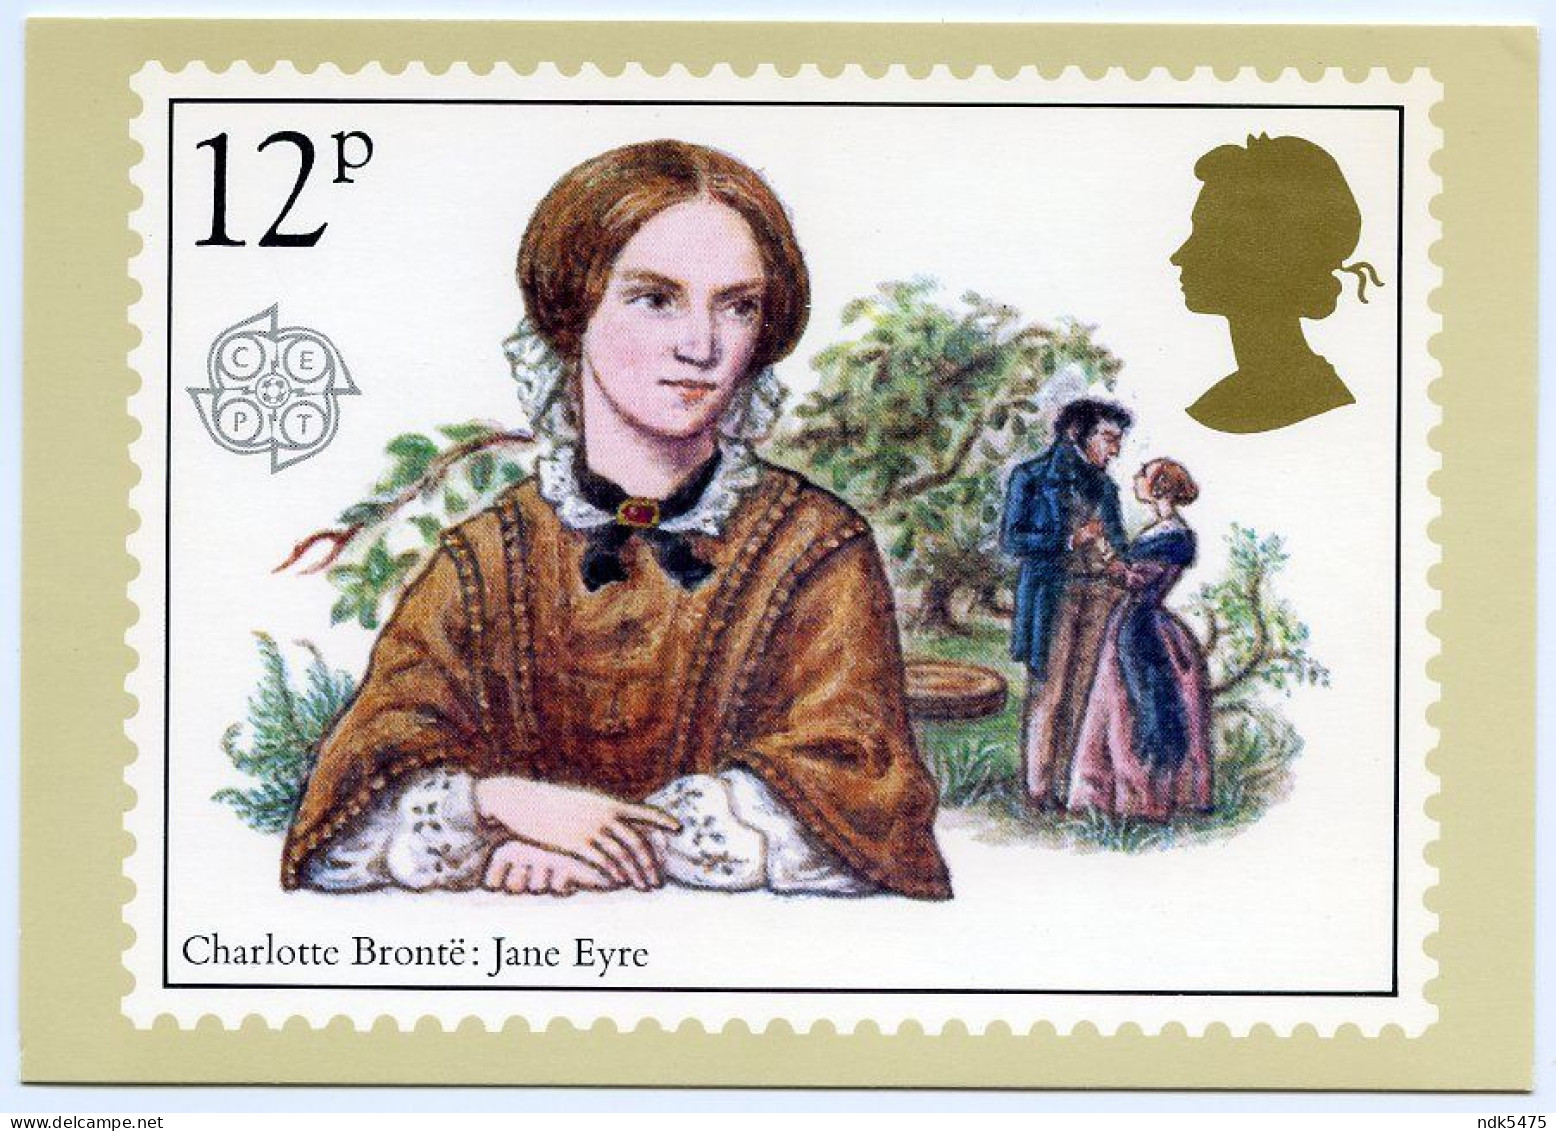 PHQ 1980 : CHARLOTTE BRONTE - JANE EYRE  (10 X 15cms Approx.) - PHQ Cards